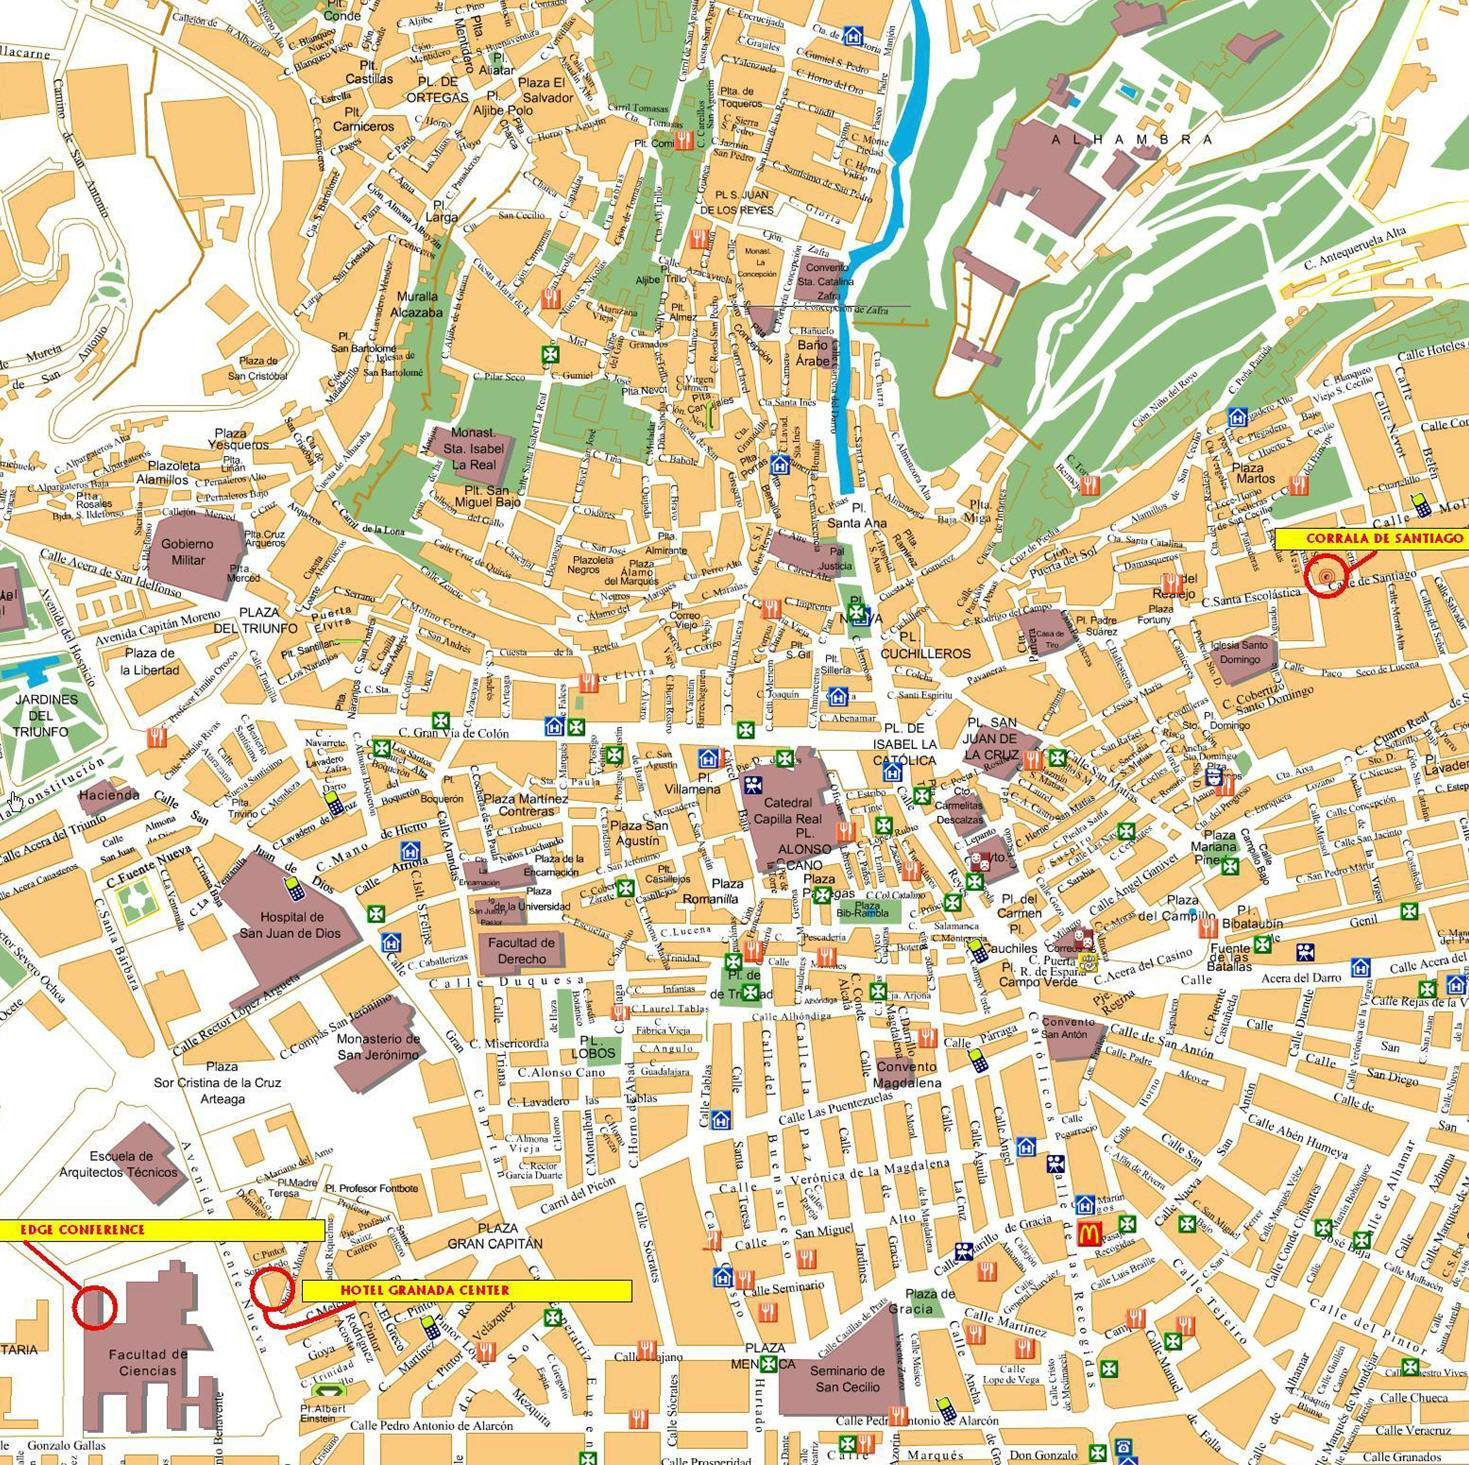 Large Granada Maps For Free Download And Print | High-Resolution And - Printable Street Map Of Nerja Spain